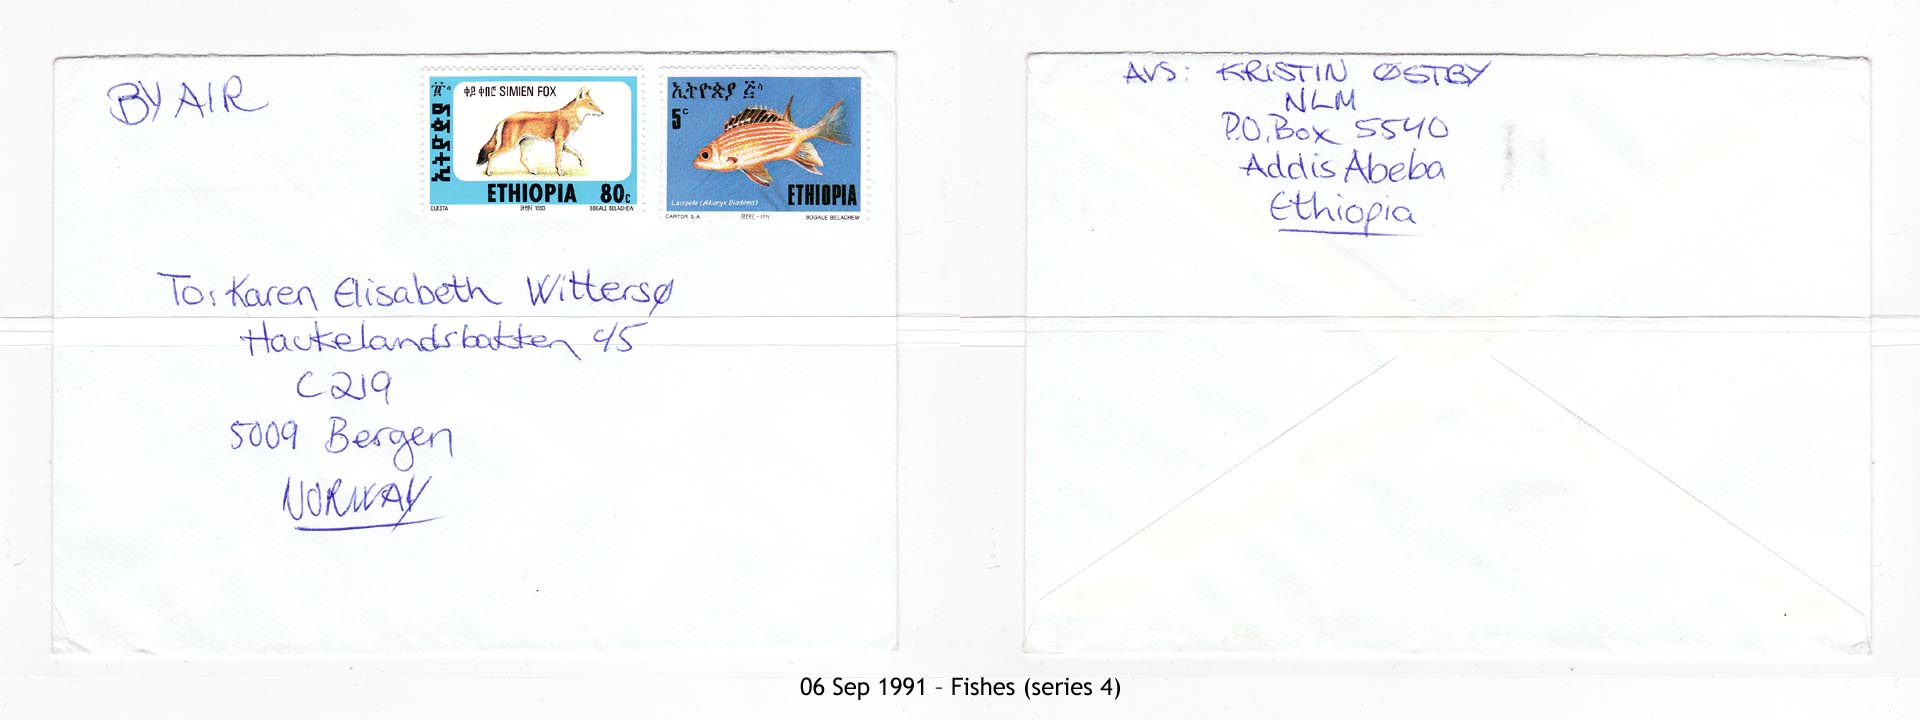 19910906 – Fishes (series 4)